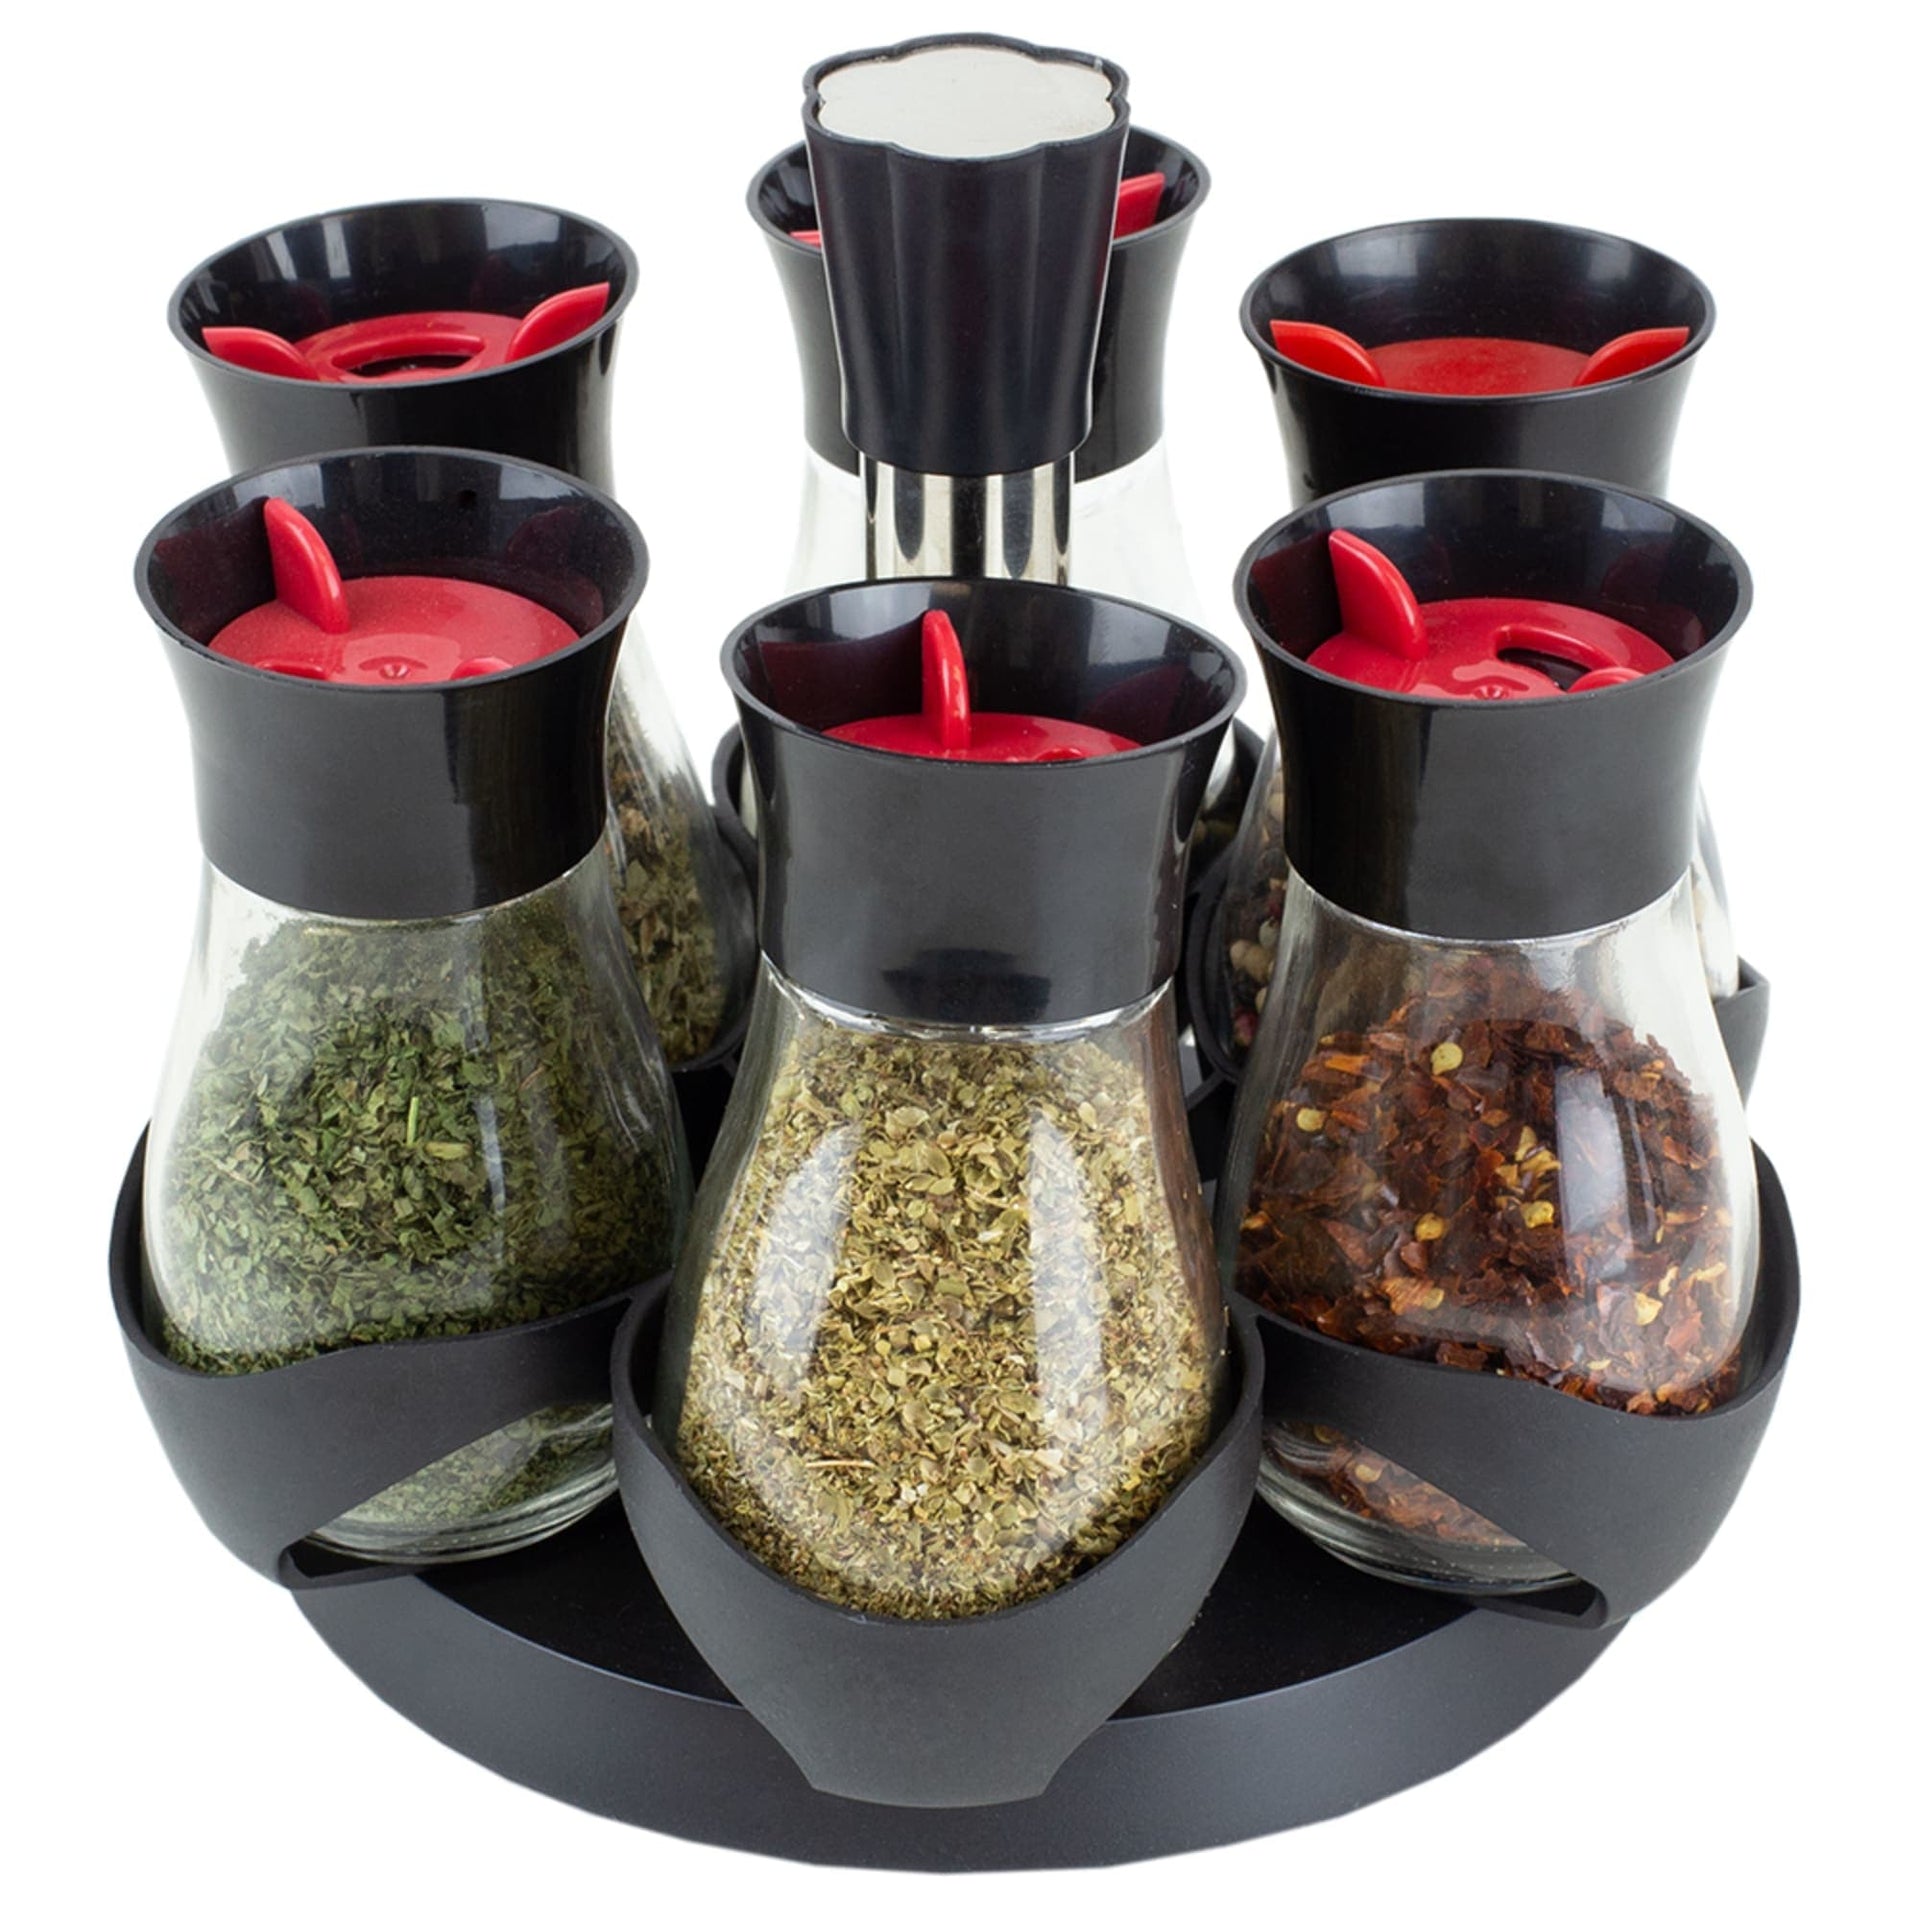 Home Basics Steel Seasoning and Herbs Organizing Spice Rack with 6 Empty  Glass Spice Jars, 1 Unit - Kroger